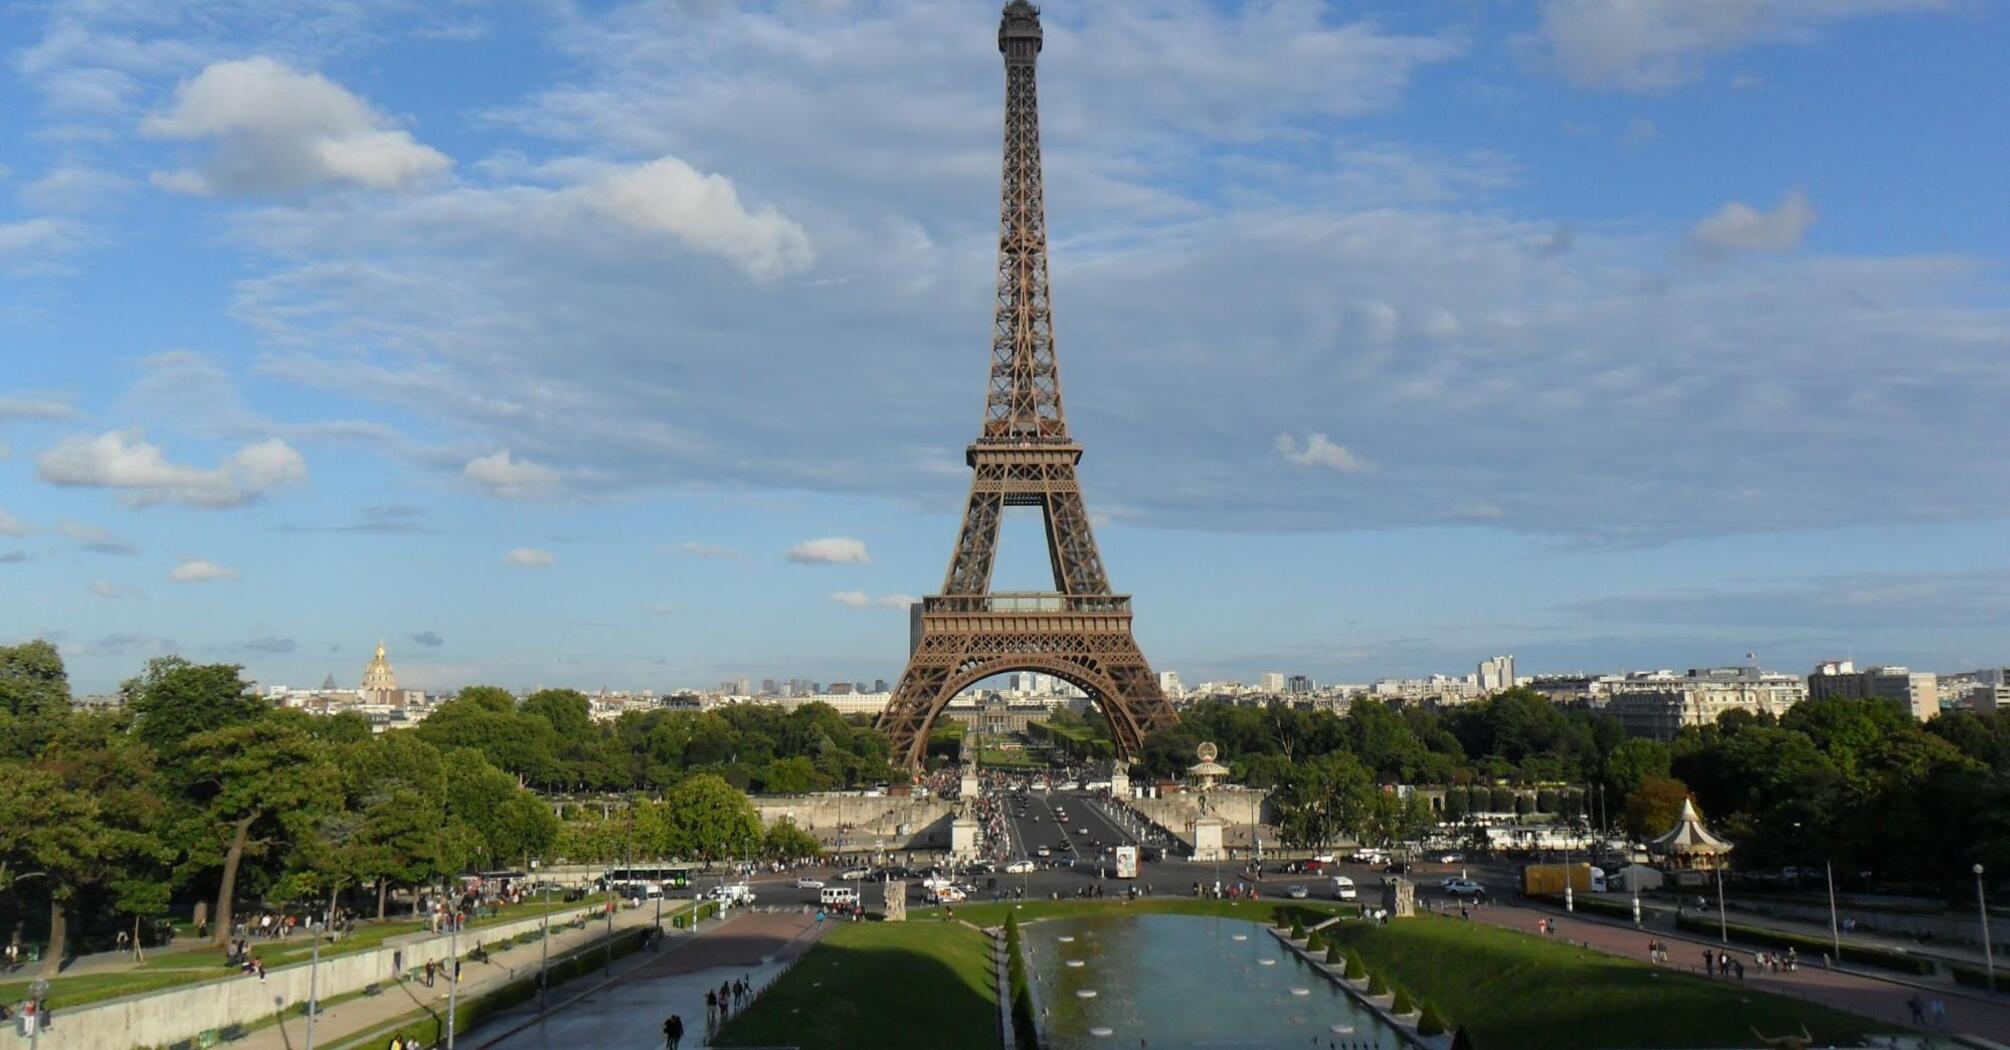 The Eiffel Tower stands tall against a clear blue sky with scattered clouds